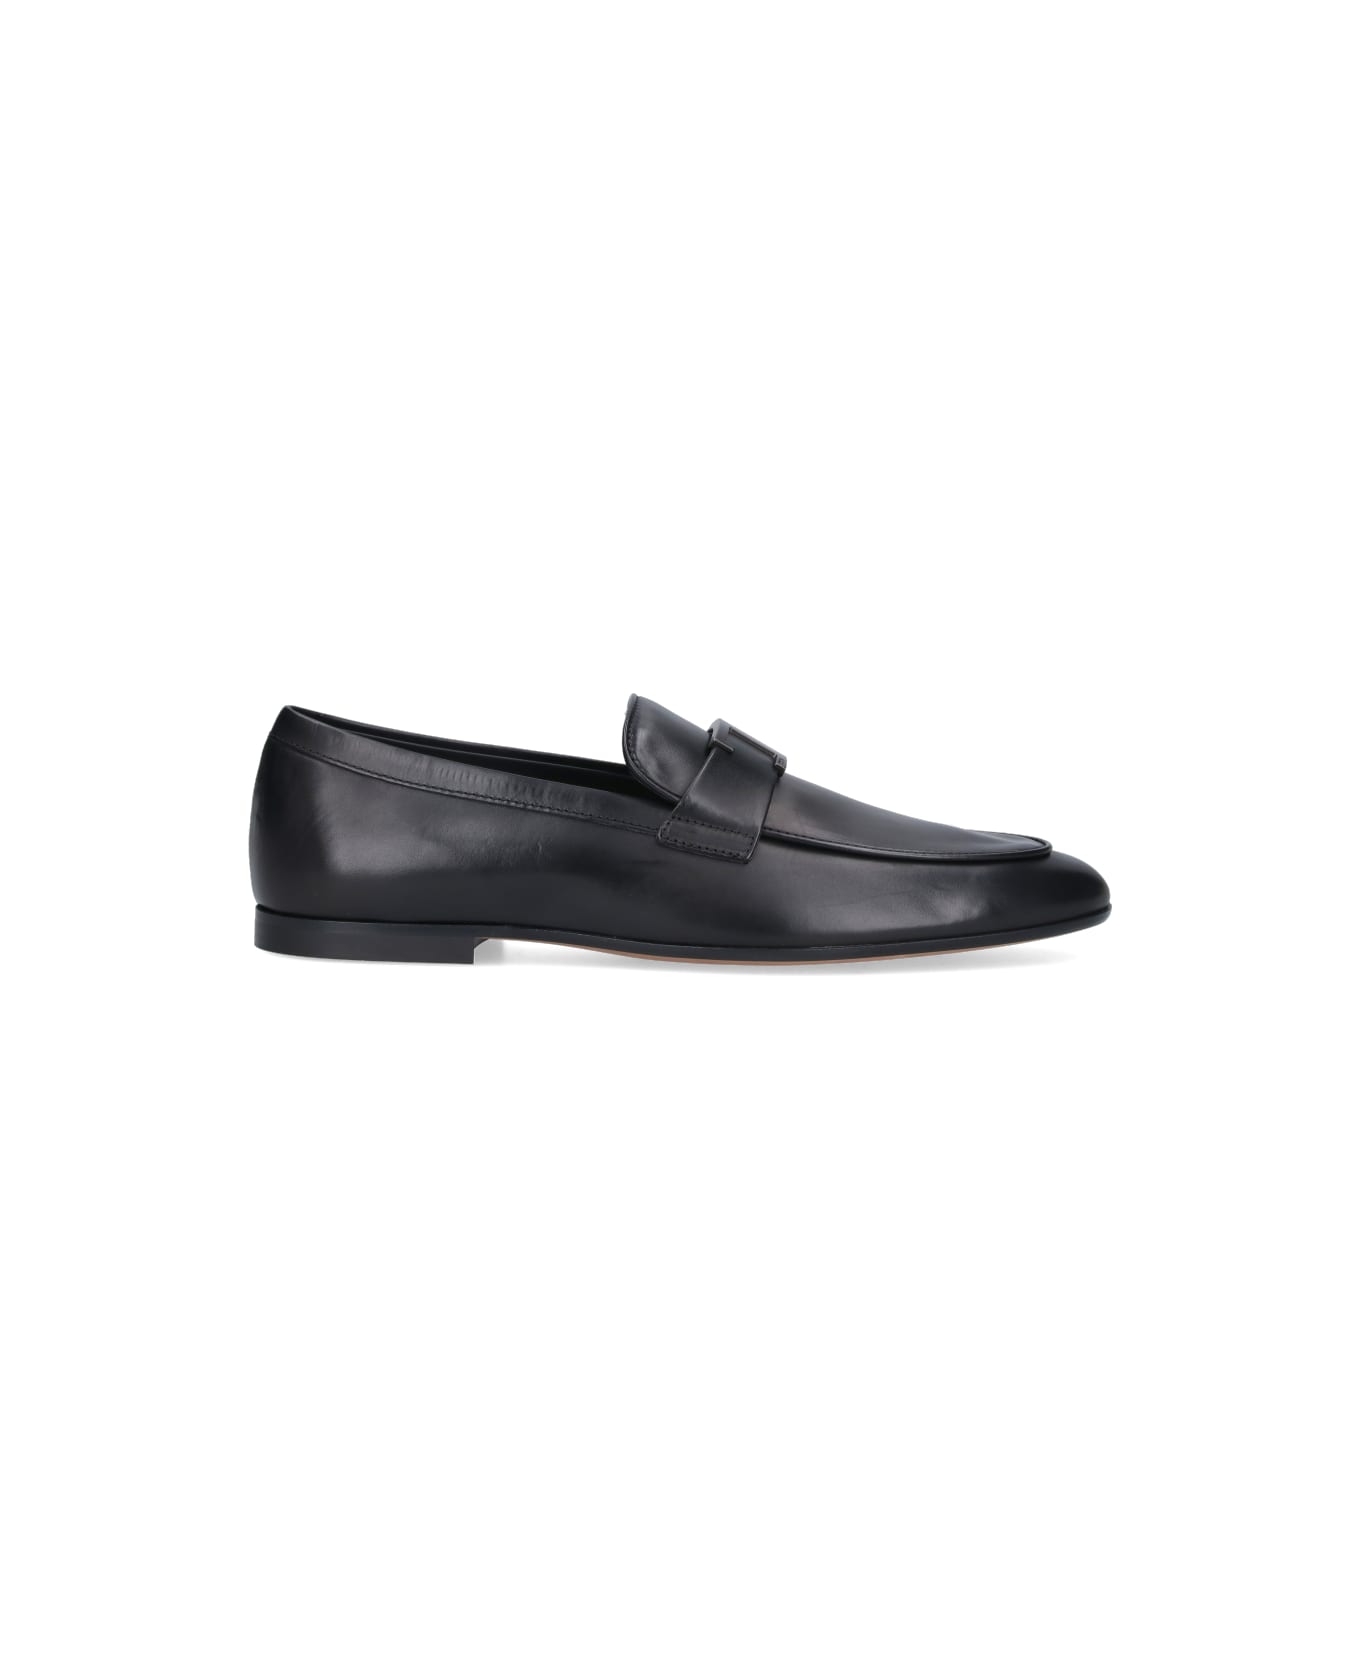 Tod's 't-timeless' Loafers - Black  